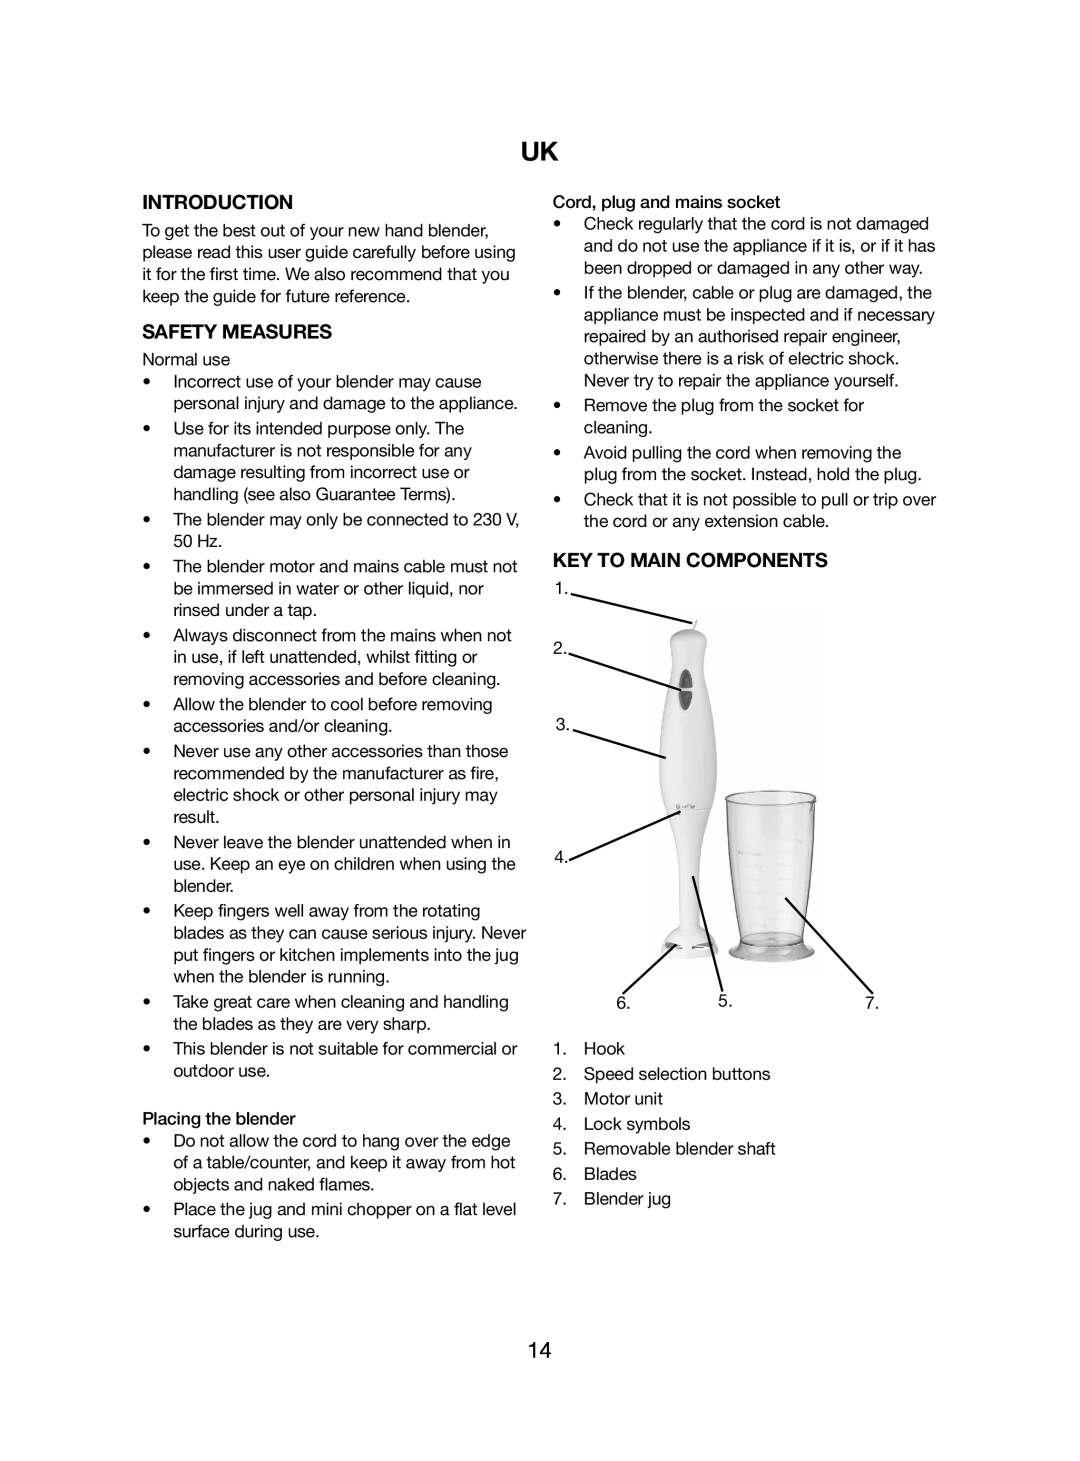 Melissa 746-086 manual Introduction, Safety Measures, Key To Main Components 